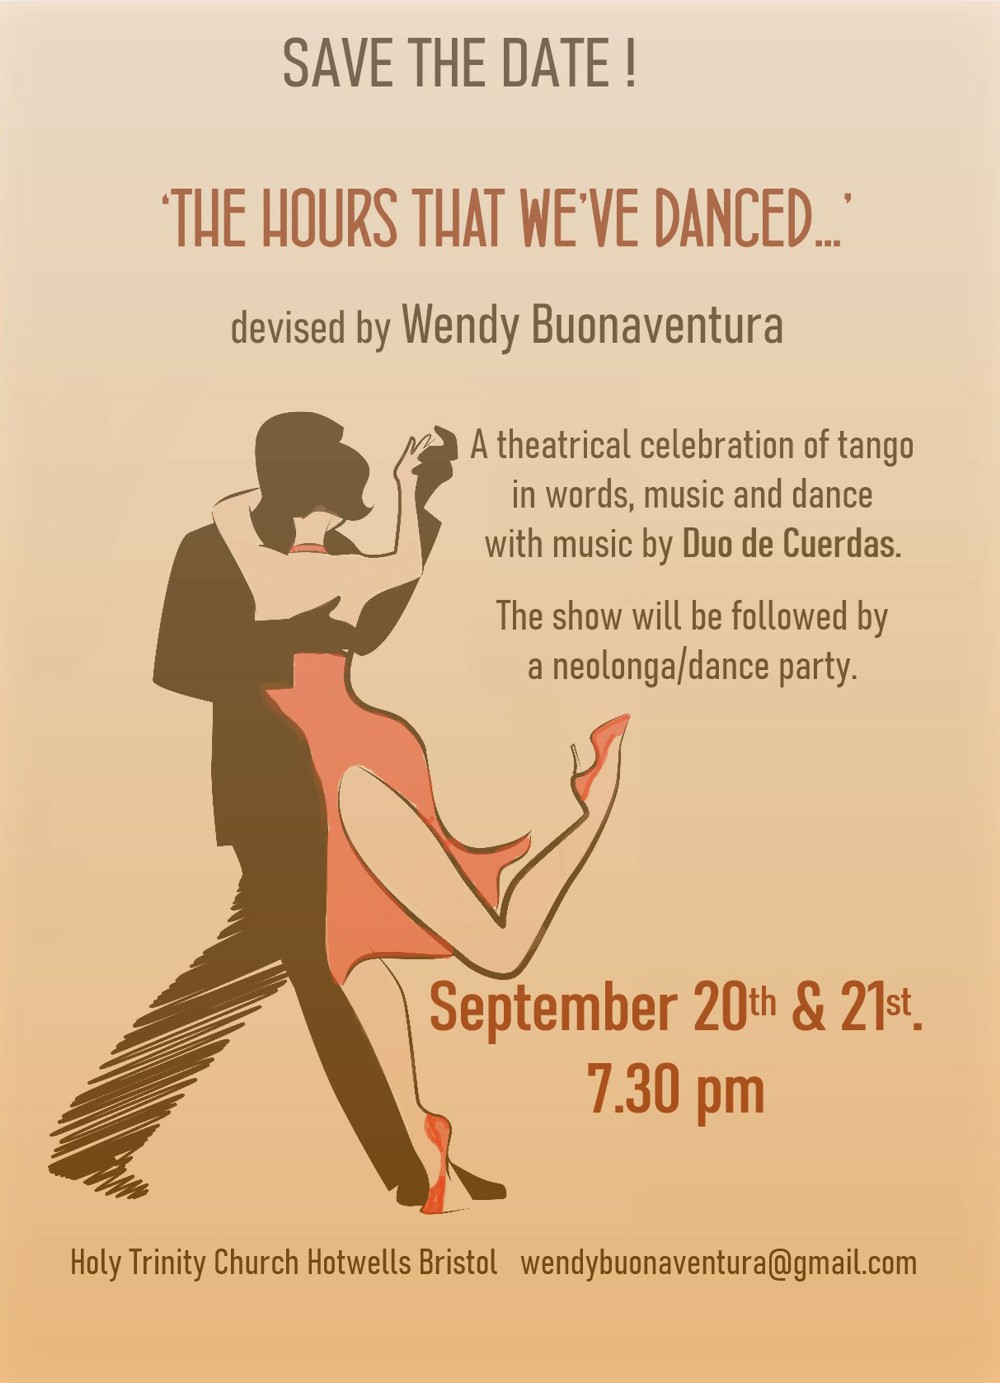 A theatrical celebration of tango in words, music and dance